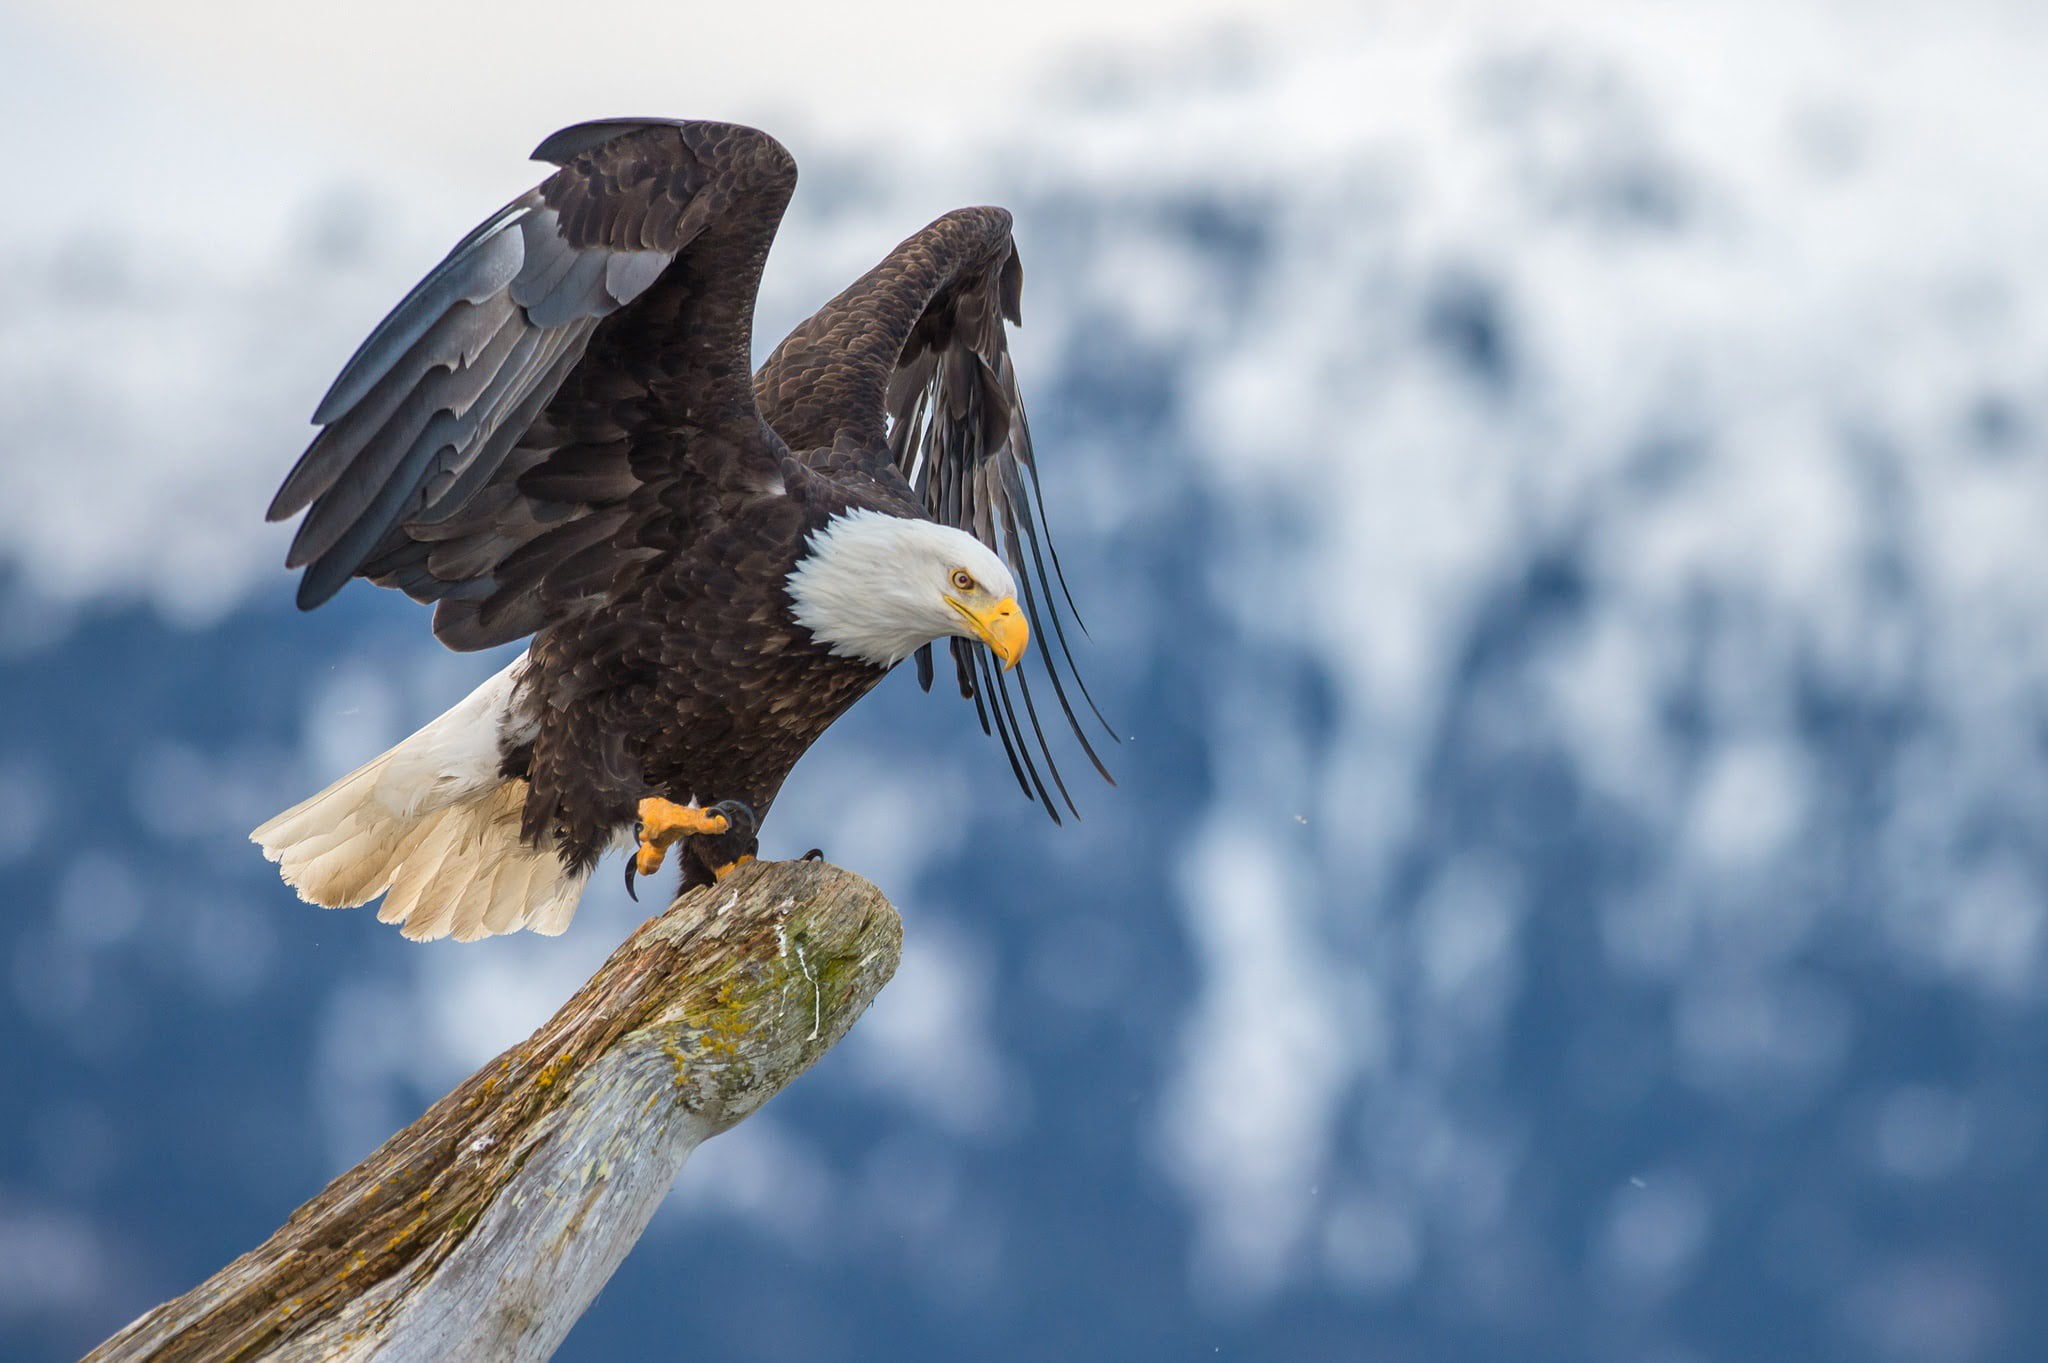 A Bald Eagle Lands On A Fallen Tree The Type Of Image That You Will Be Able To Capture During The Natureslens Bald Eagles & Otters Of Alaska Photography Holiday